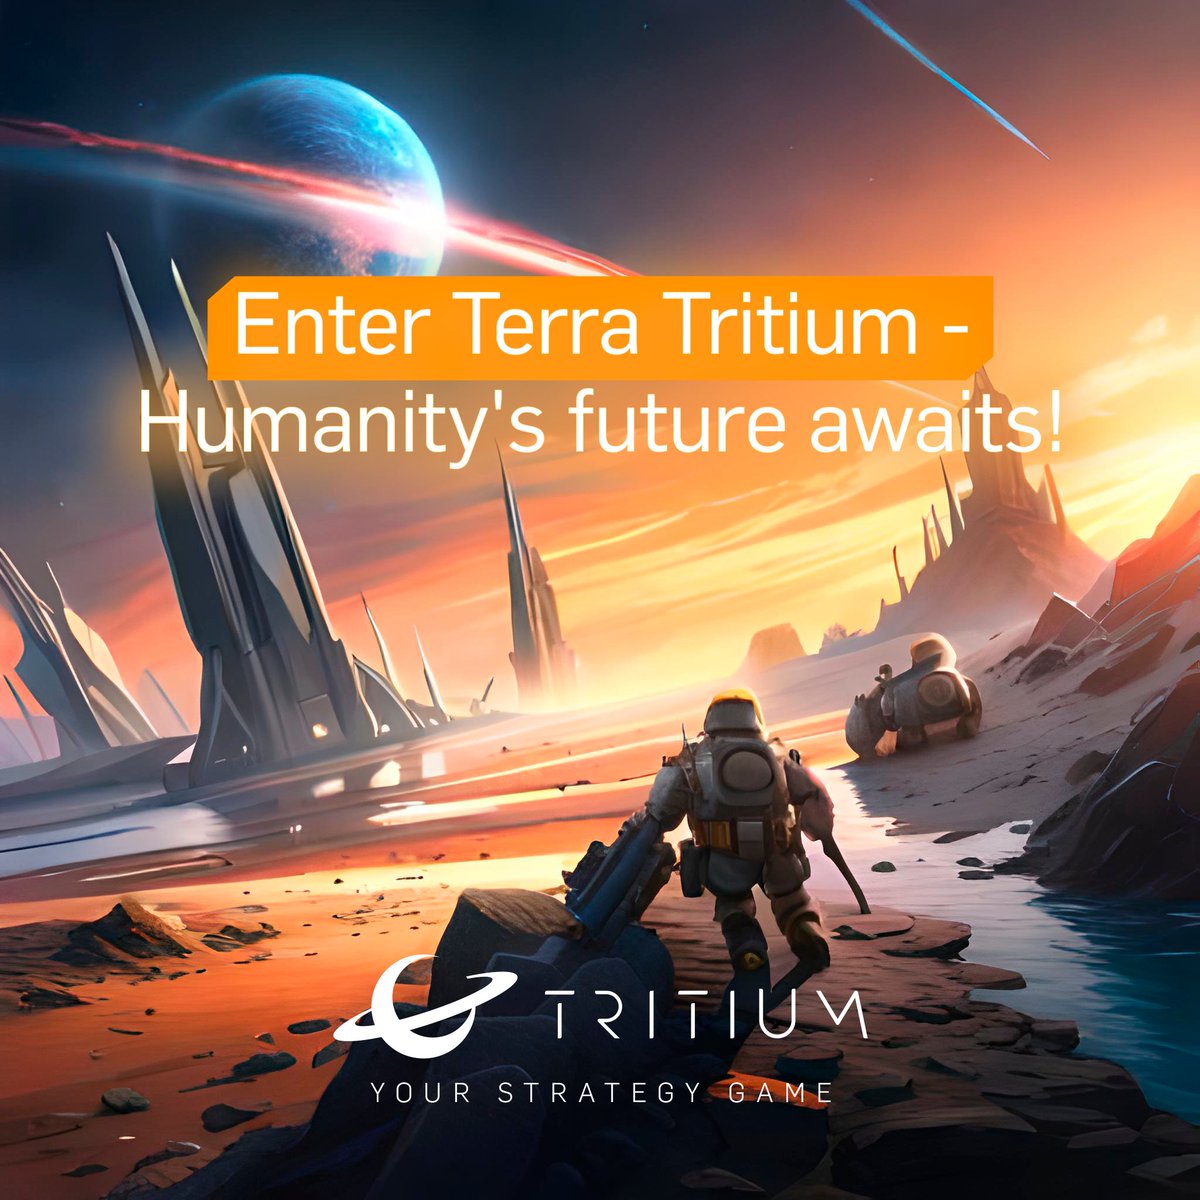 Welcome to the world of Terra Tritium! In the year 2450 AD, humanity finds itself in a dire situation, grappling with a scarcity of natural and energy resources. Despite remarkable technological advancements, the future hangs in the balance. Join our community: